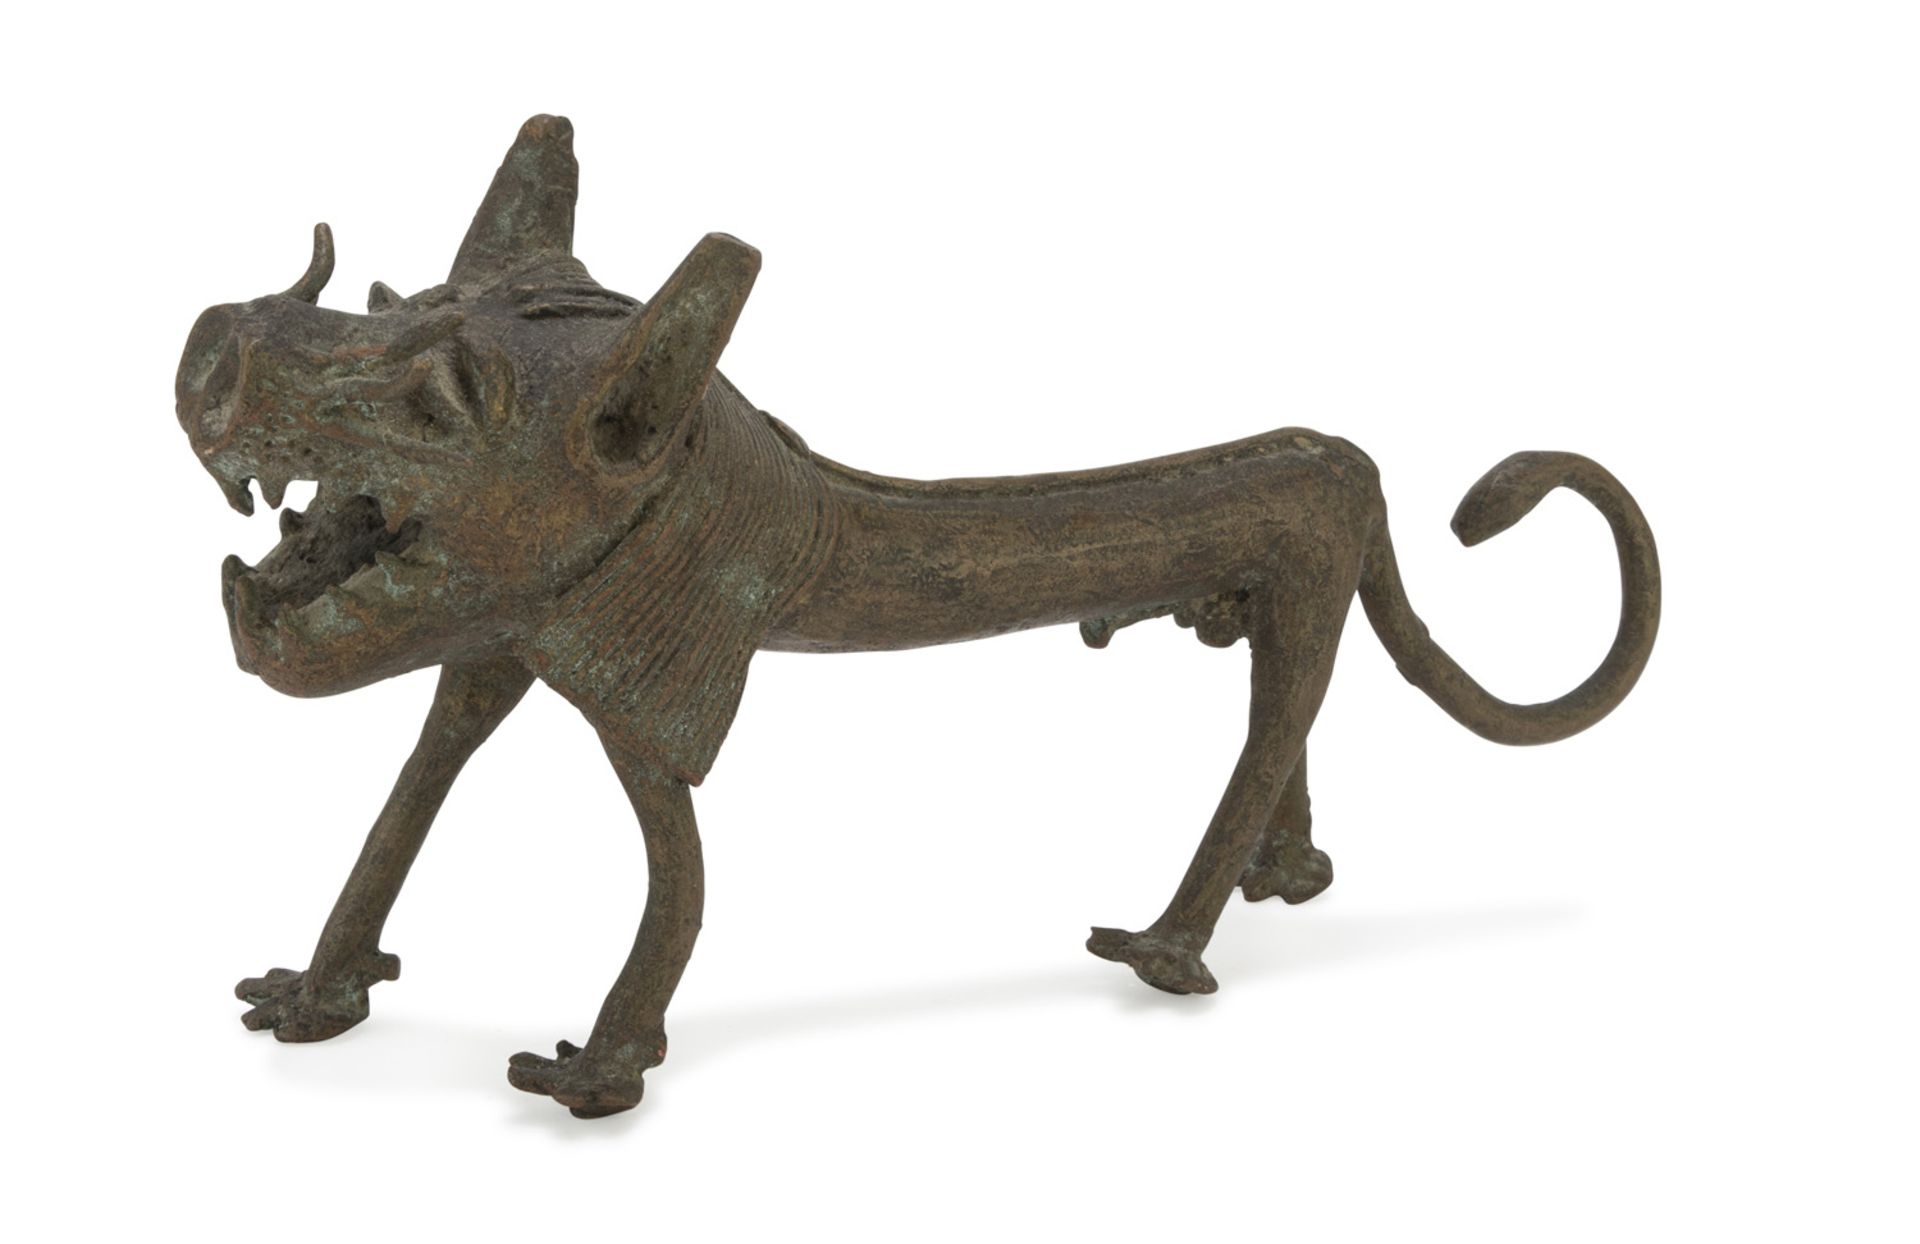 A MIDDLE EASTERN BURNISHED PATINA BRONZE SCULPTURE OF MYTHOLOGICAL FAIR. 20TH CENTURY.